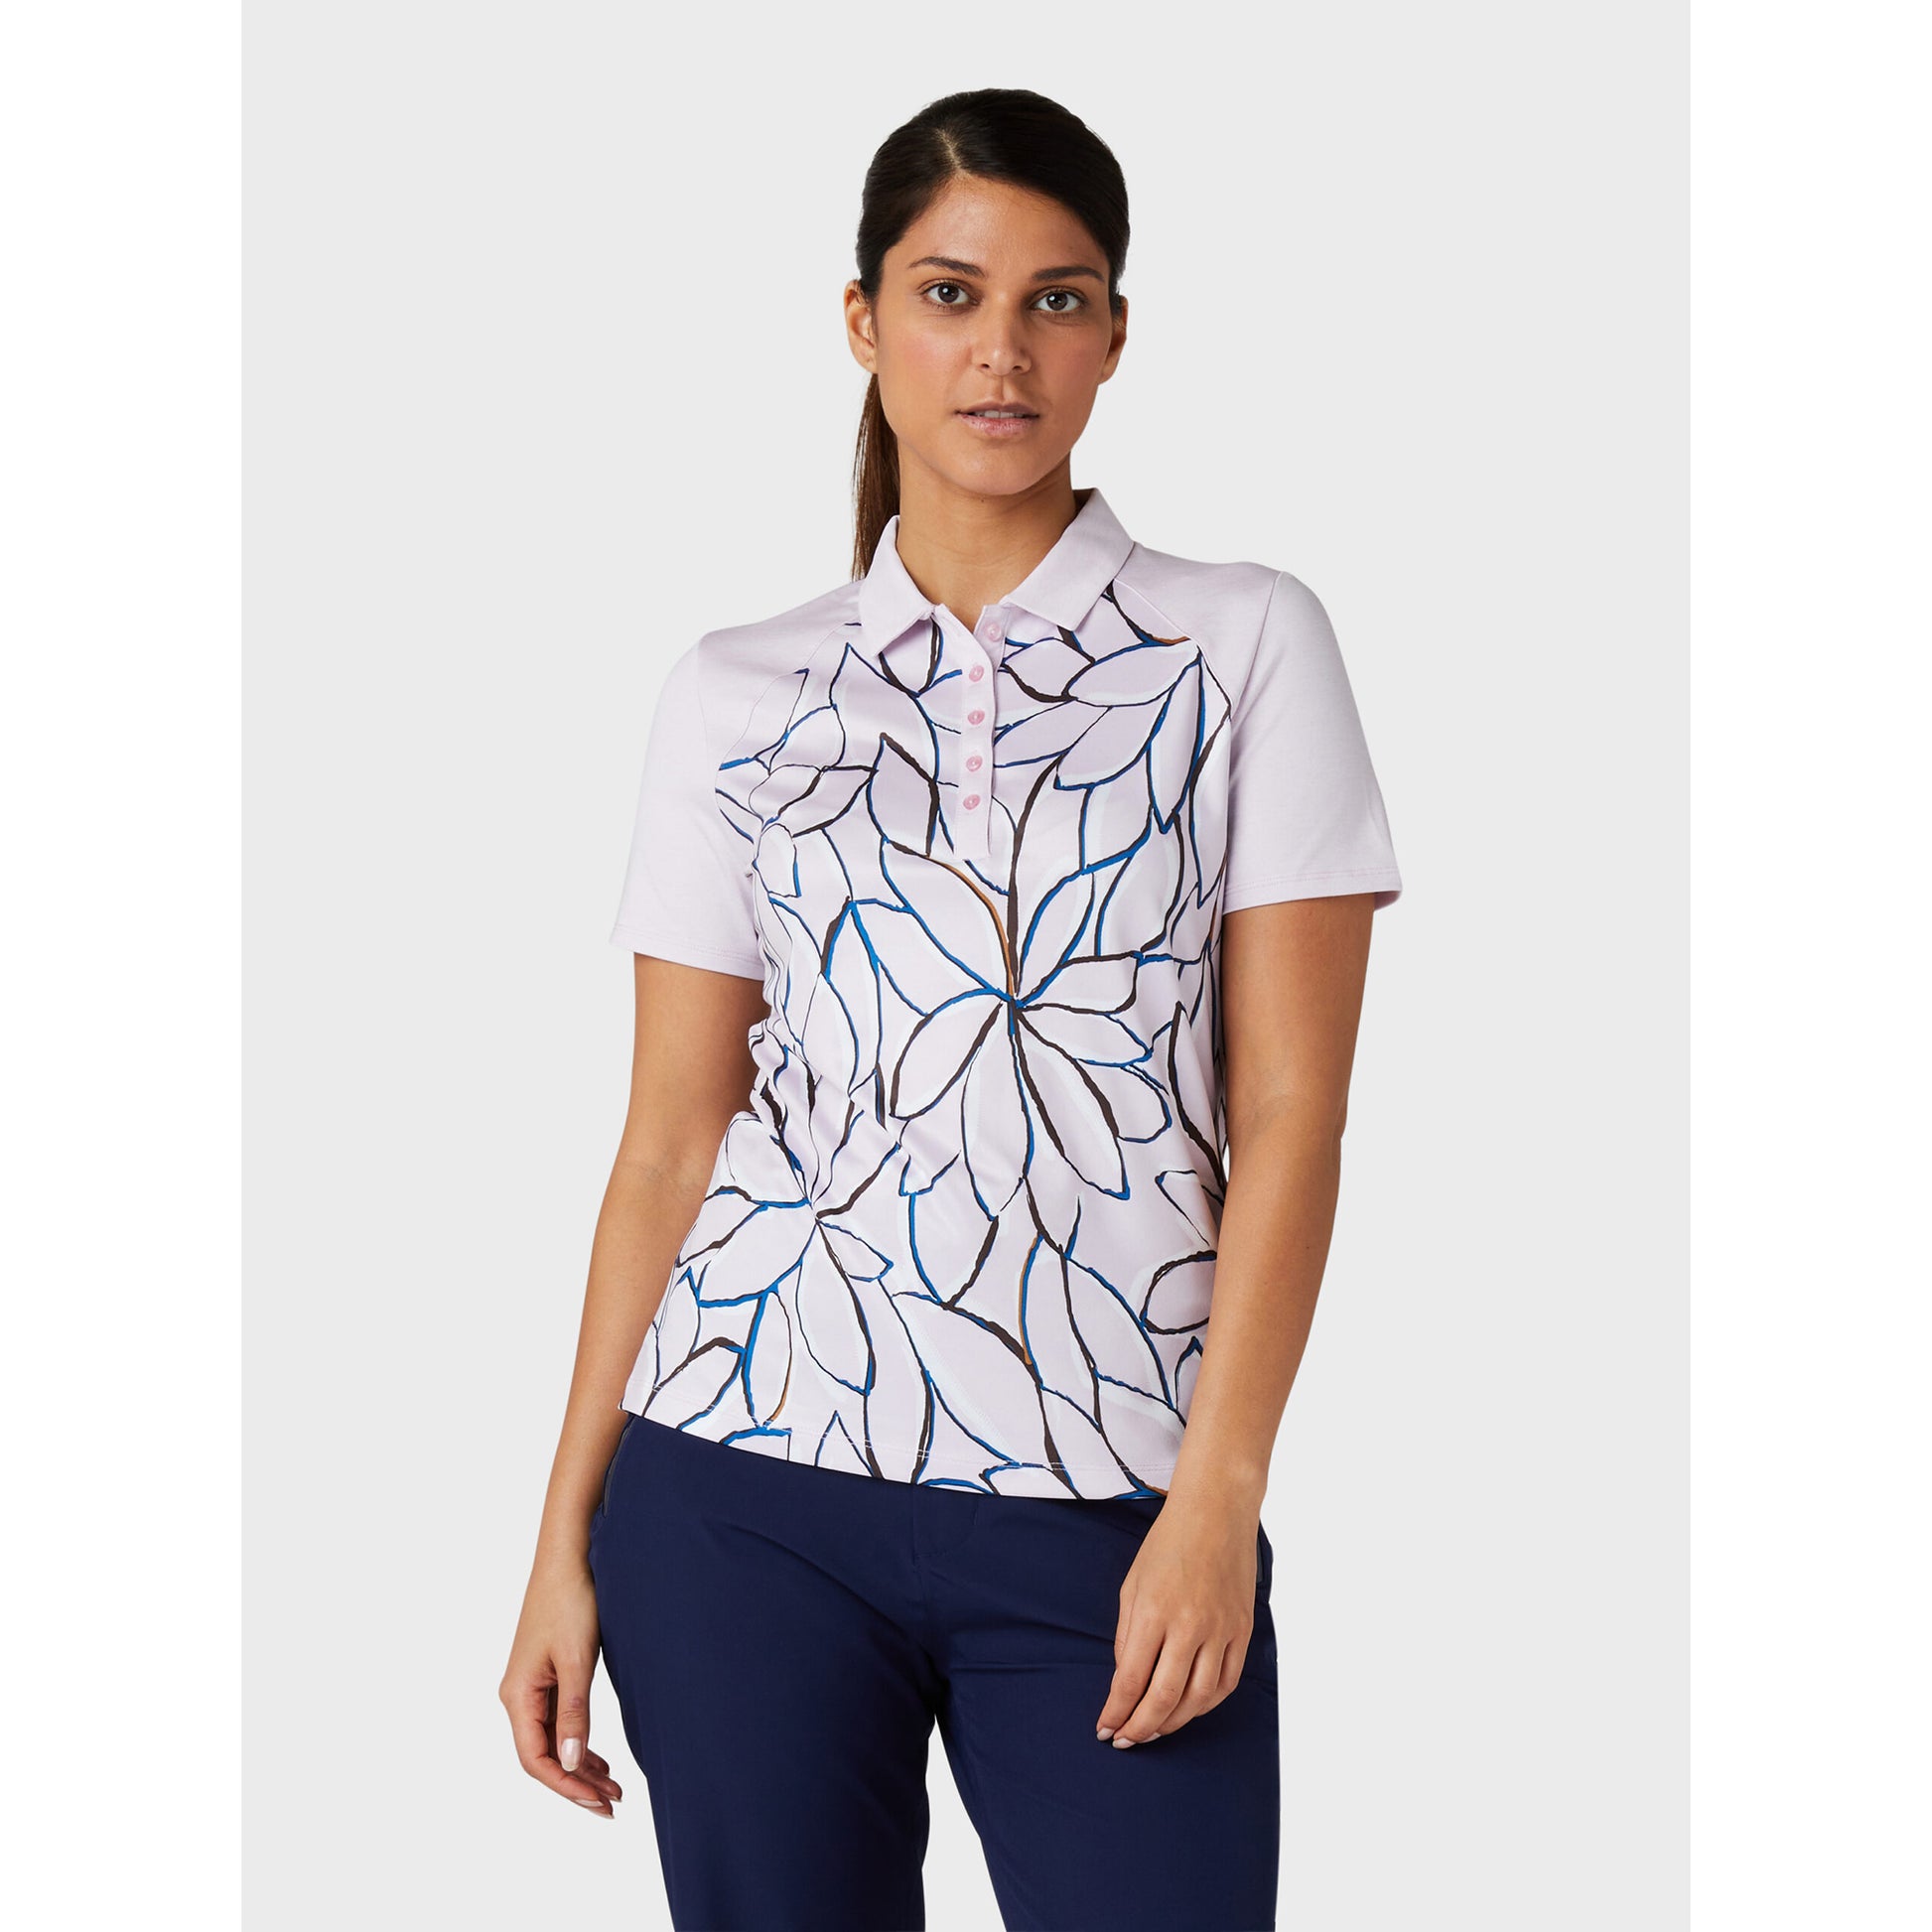 Callaway Ladies Short Sleeve Polo Shirt with Floral Pattern in Pink Nectar